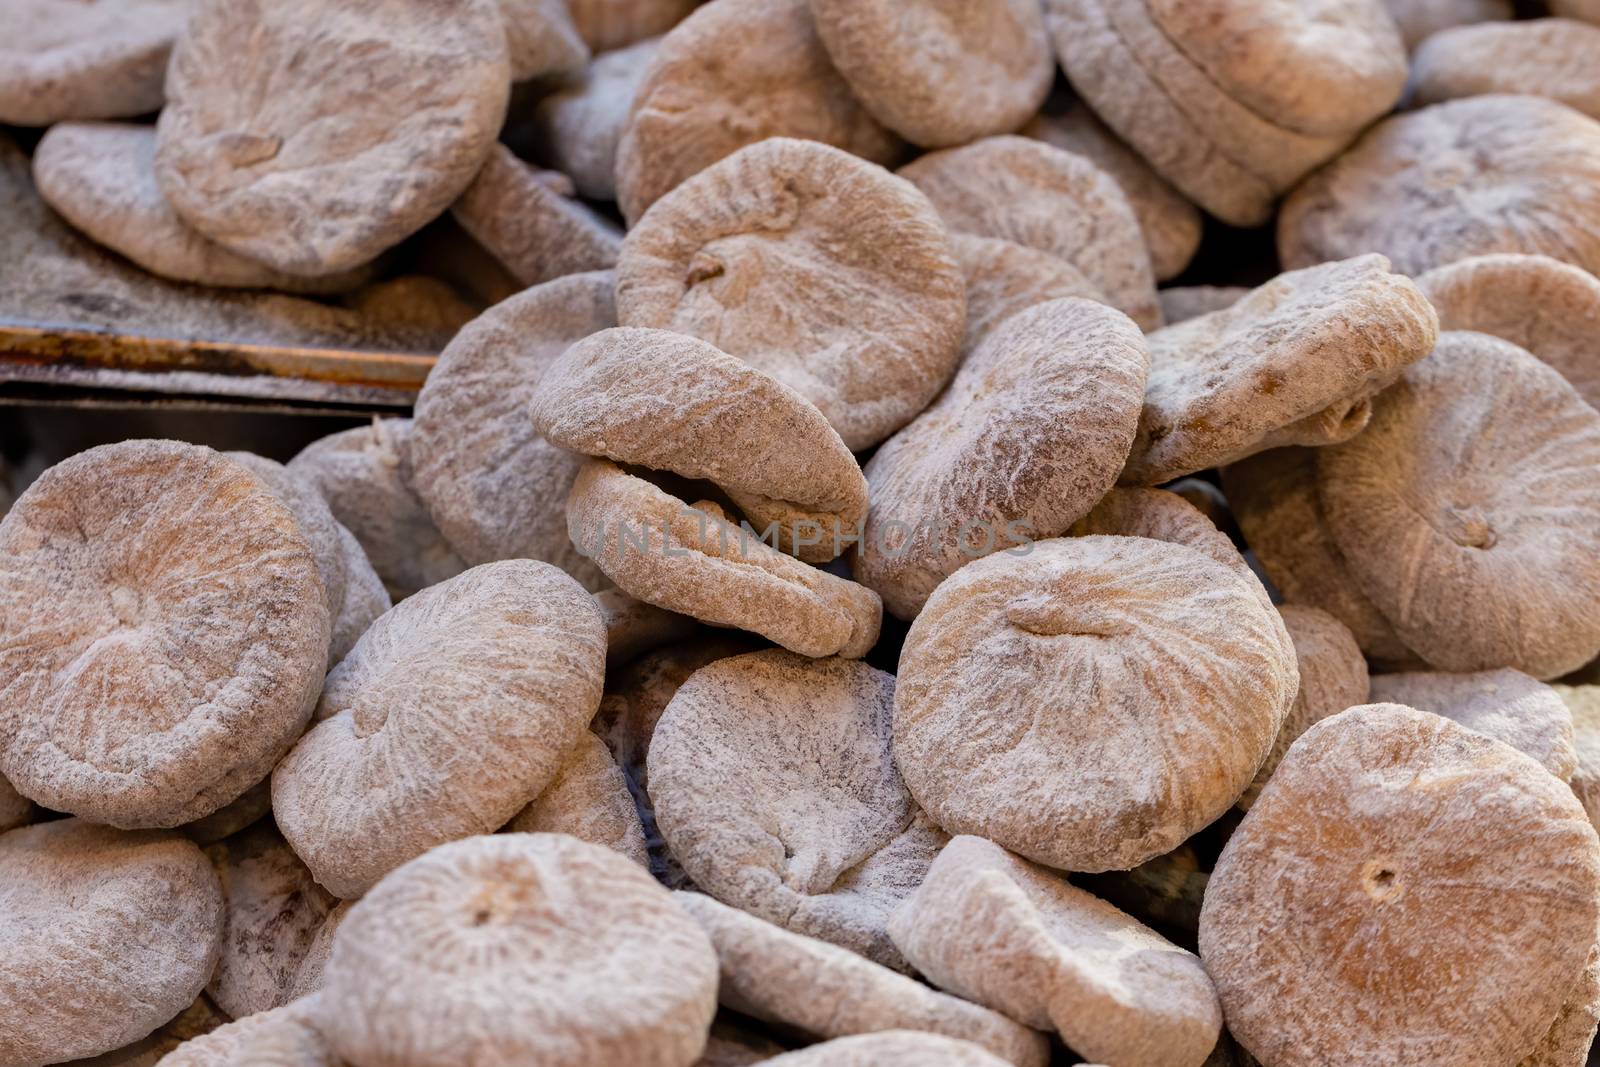 Dried figs, coated in wheat flour, on a market stall by magicbones